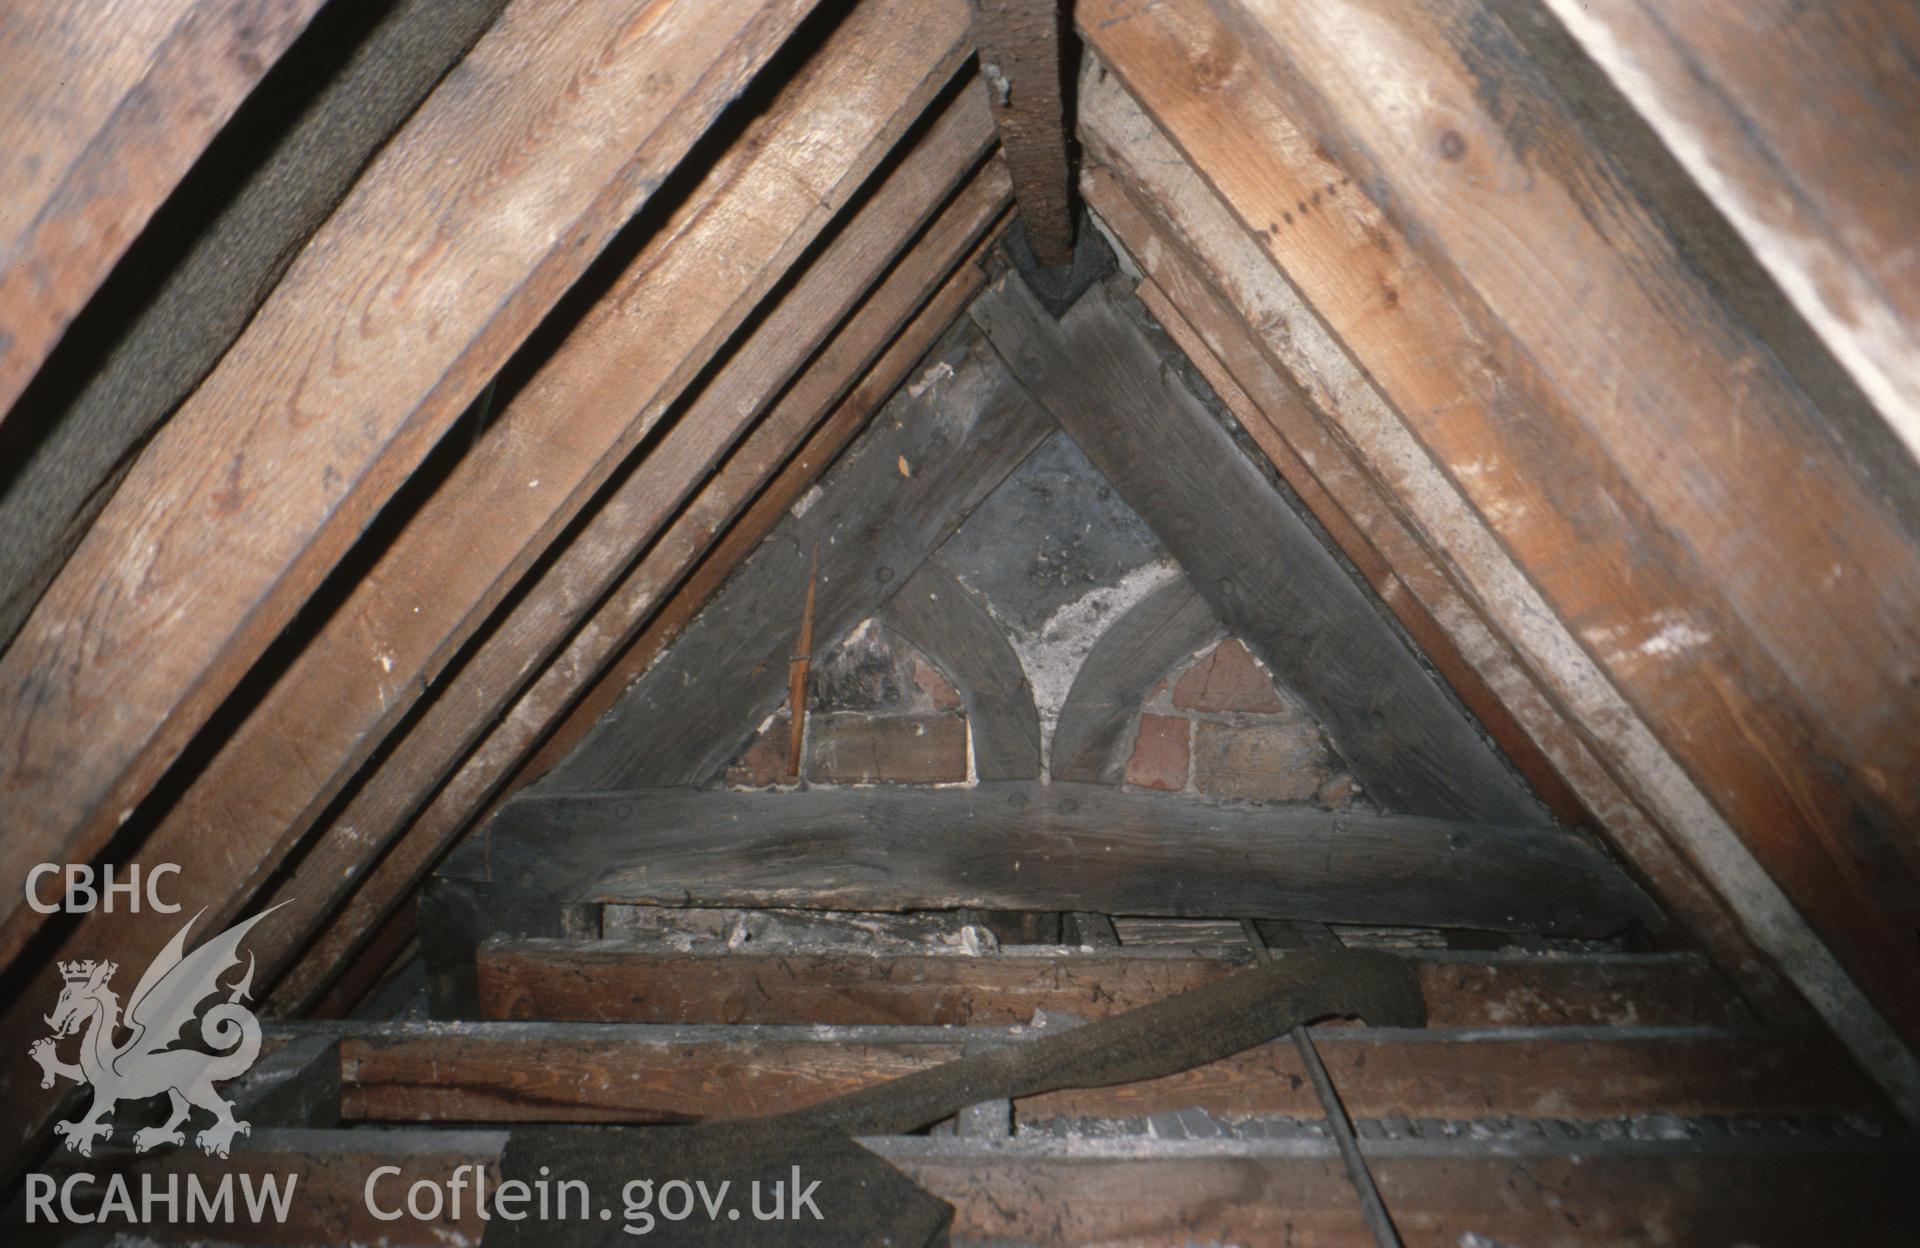 Interior view showing decorative framing to the original dormer gable window on east end.